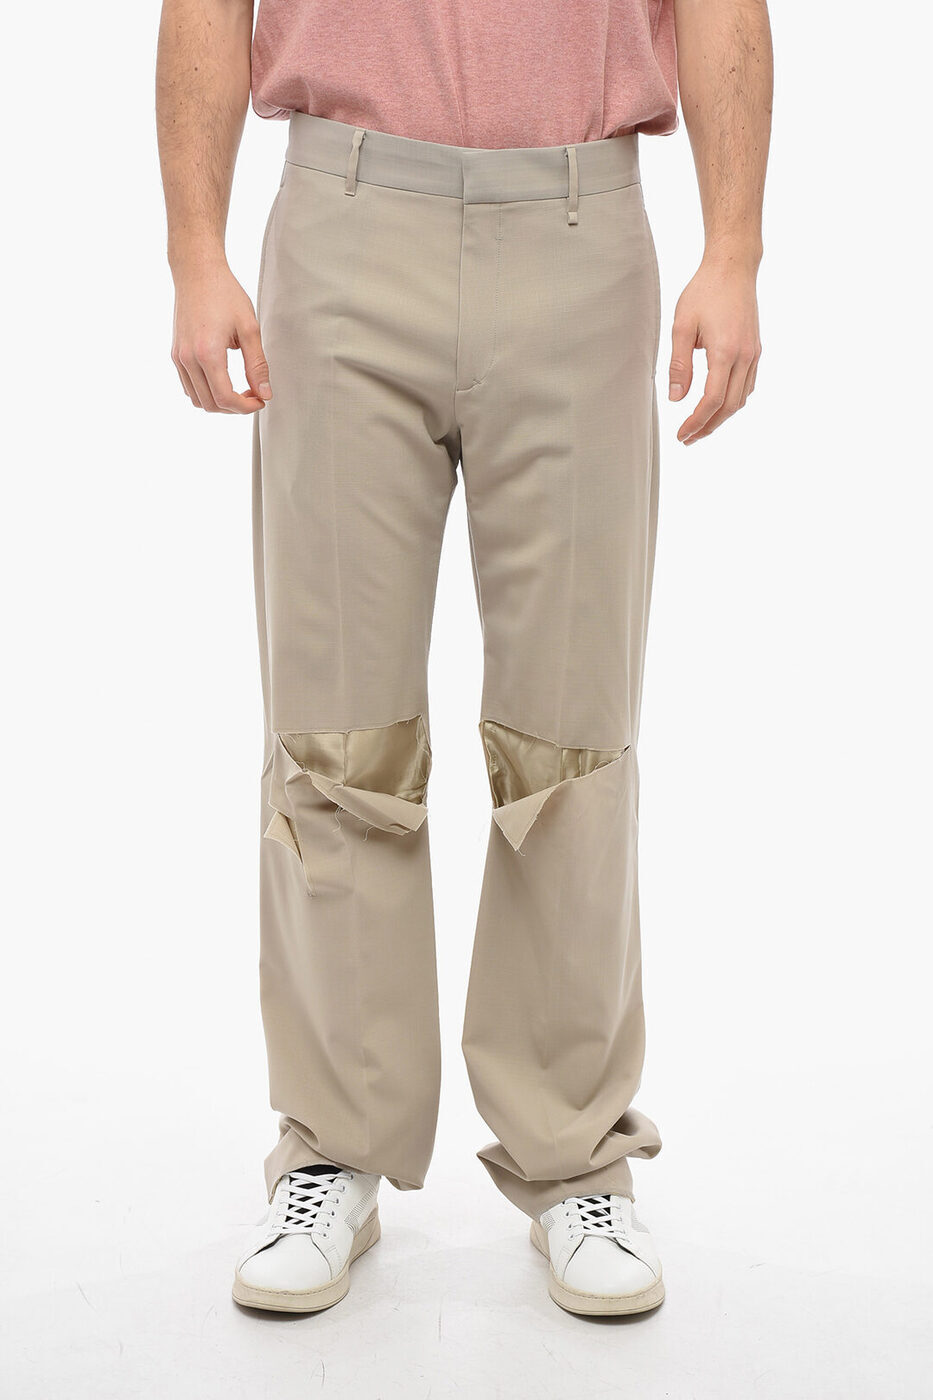 GIVENCHY ジバンシィ パンツ BM518J14NX 099 メンズ FRONT-PLEATED PANTS WITH CUT OUT DETAILING 【関税・送料無料】【ラッピング無料】 dk